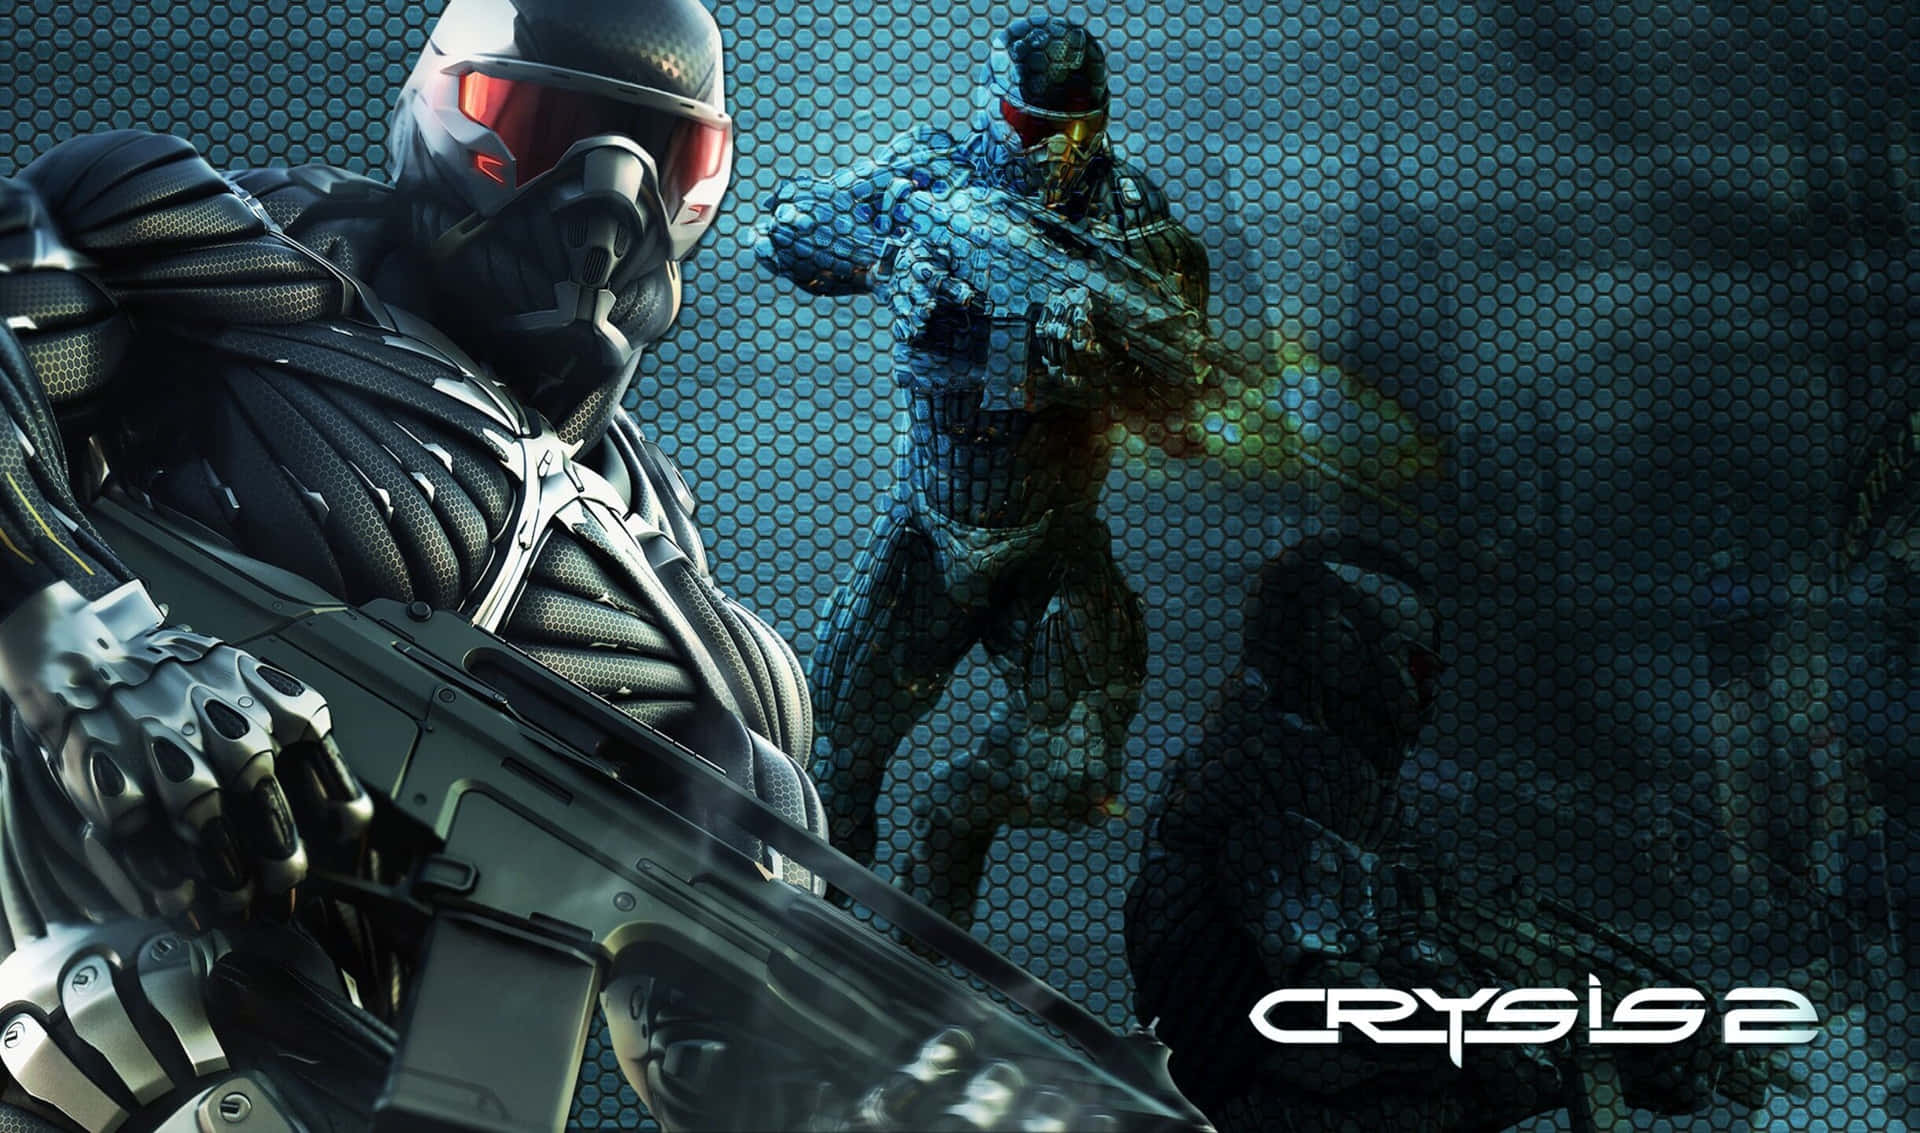 Fight for Humanity in Crysis 3